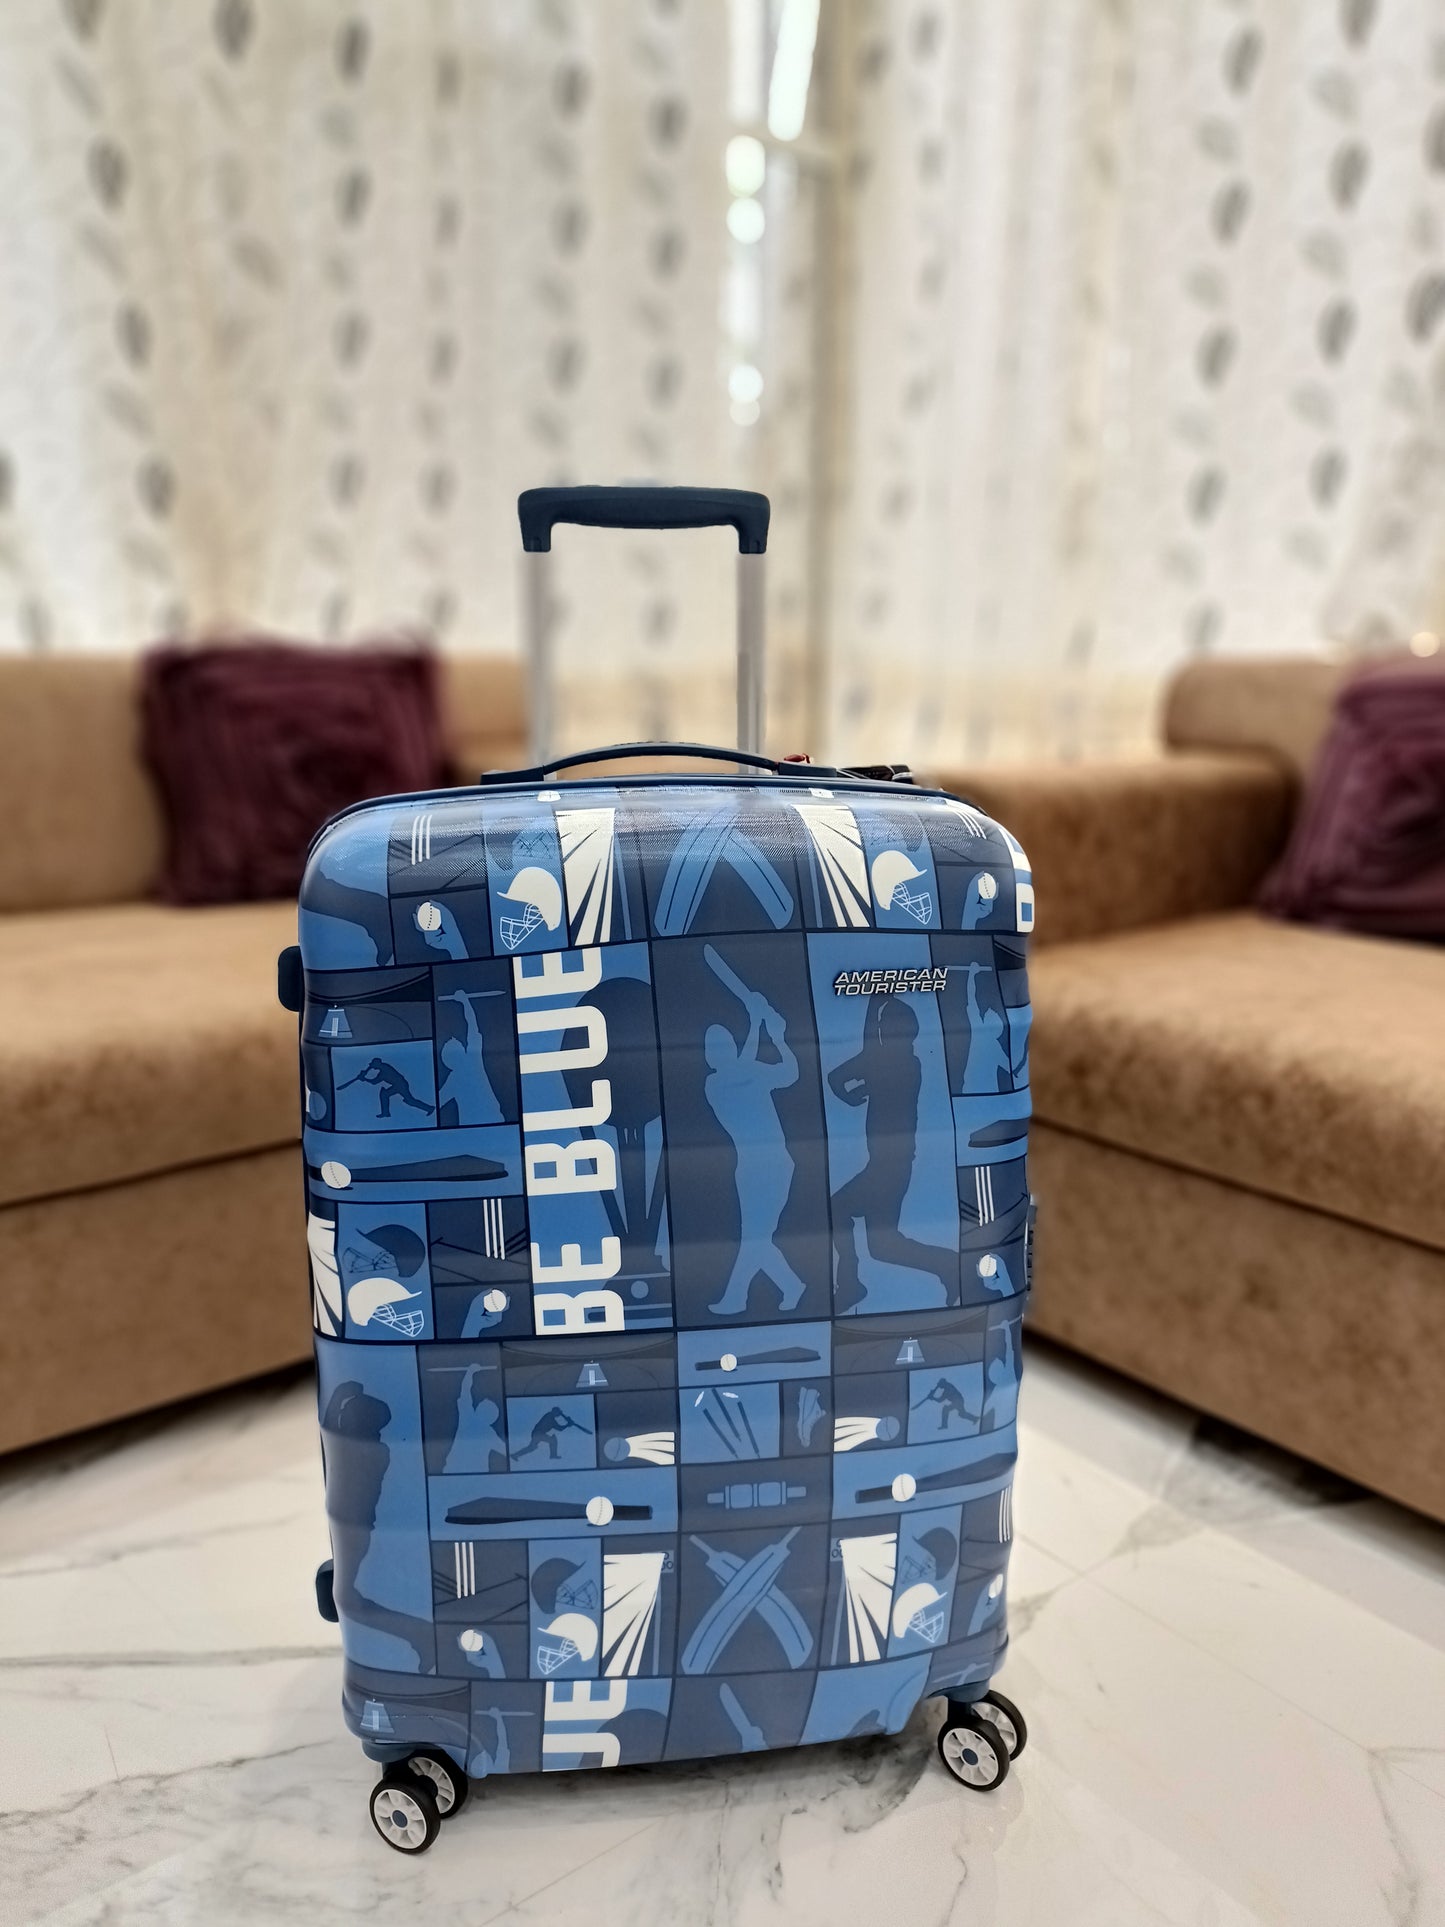 American Tourister play for blue Worldcup Trolly bag blue colour with 8 wheels